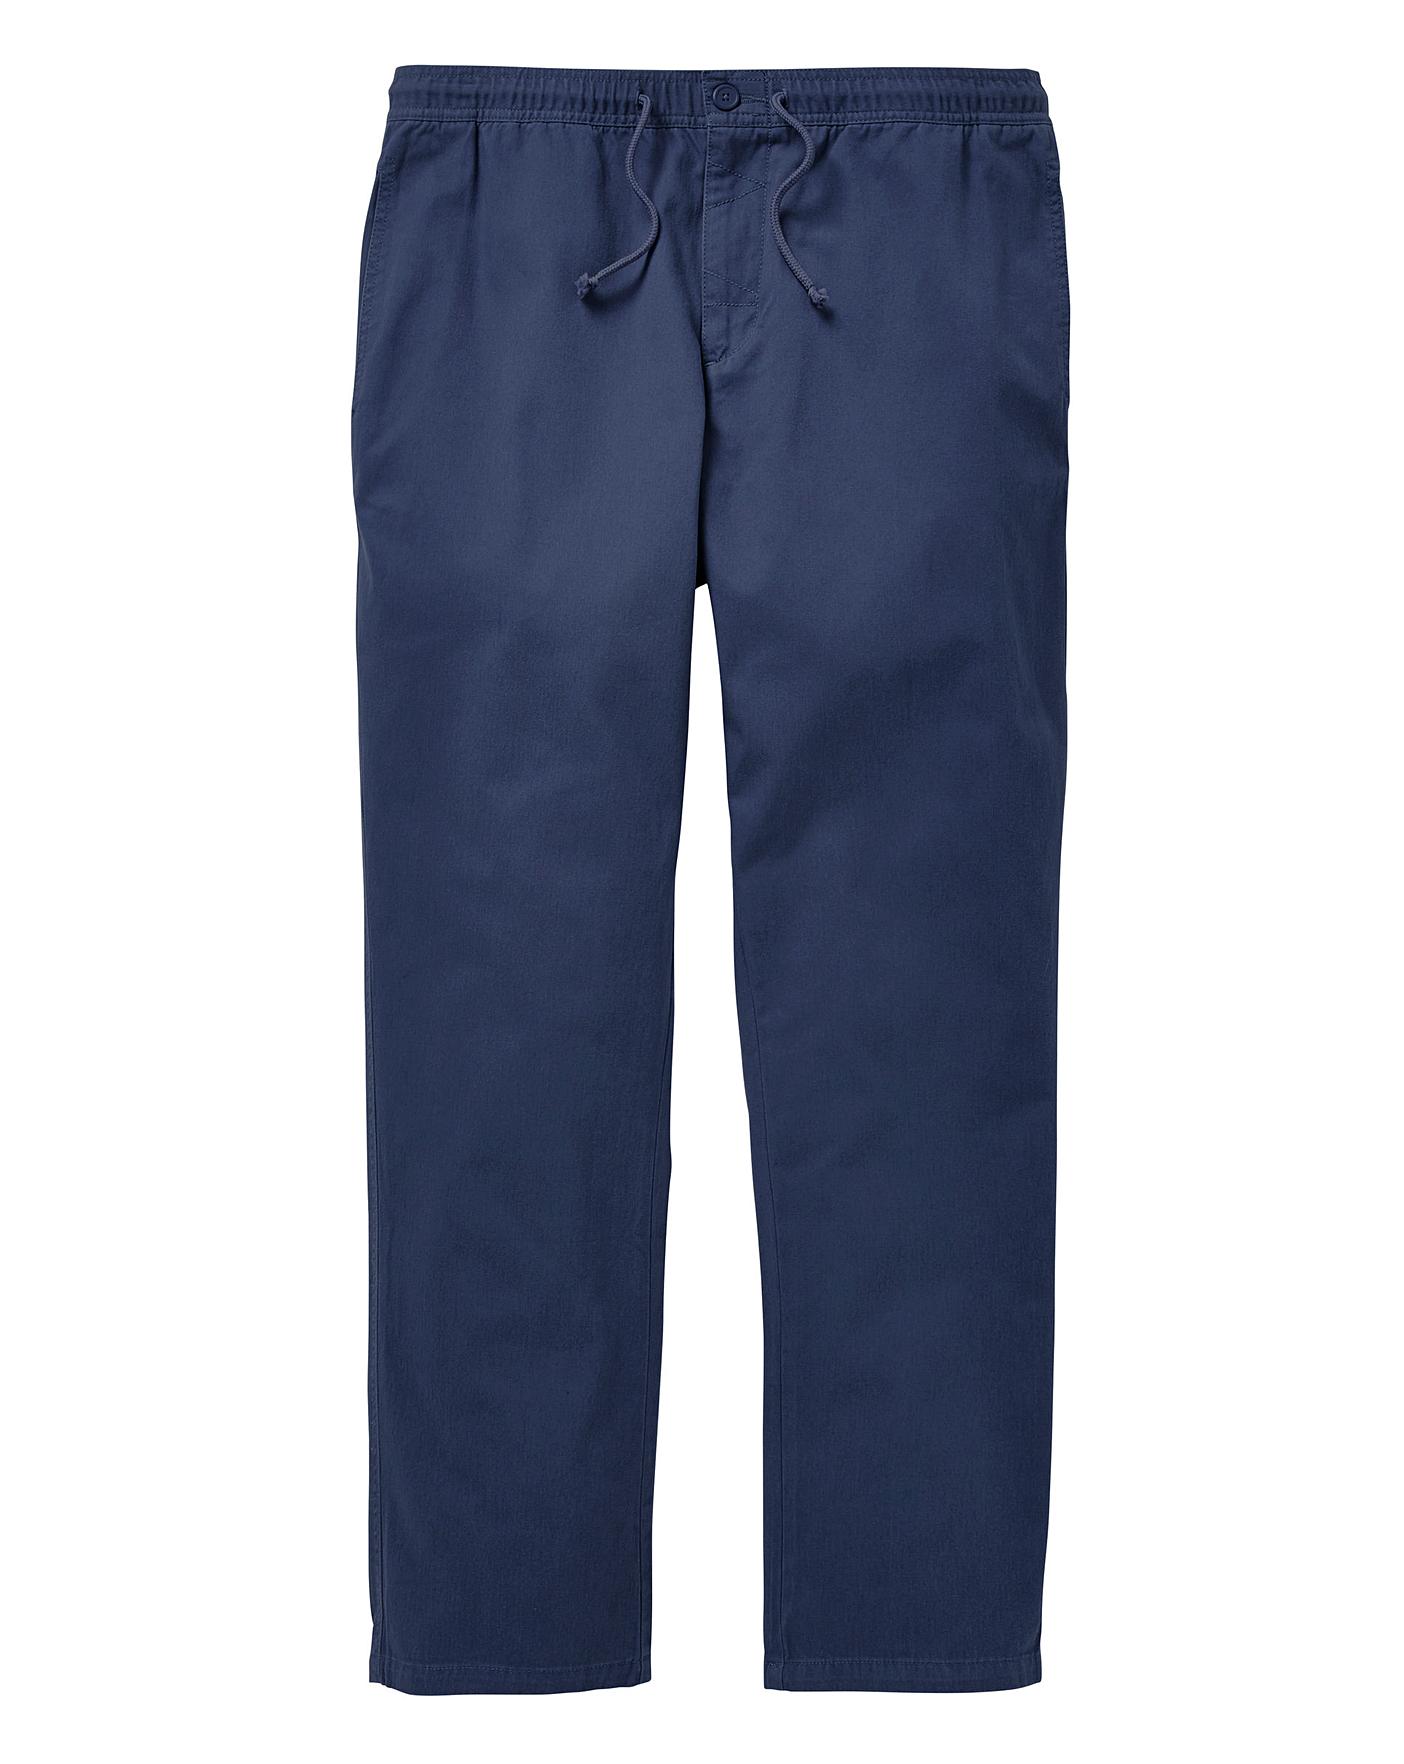 Premier Man Cotton Rugby Trousers 27in | Premier Man